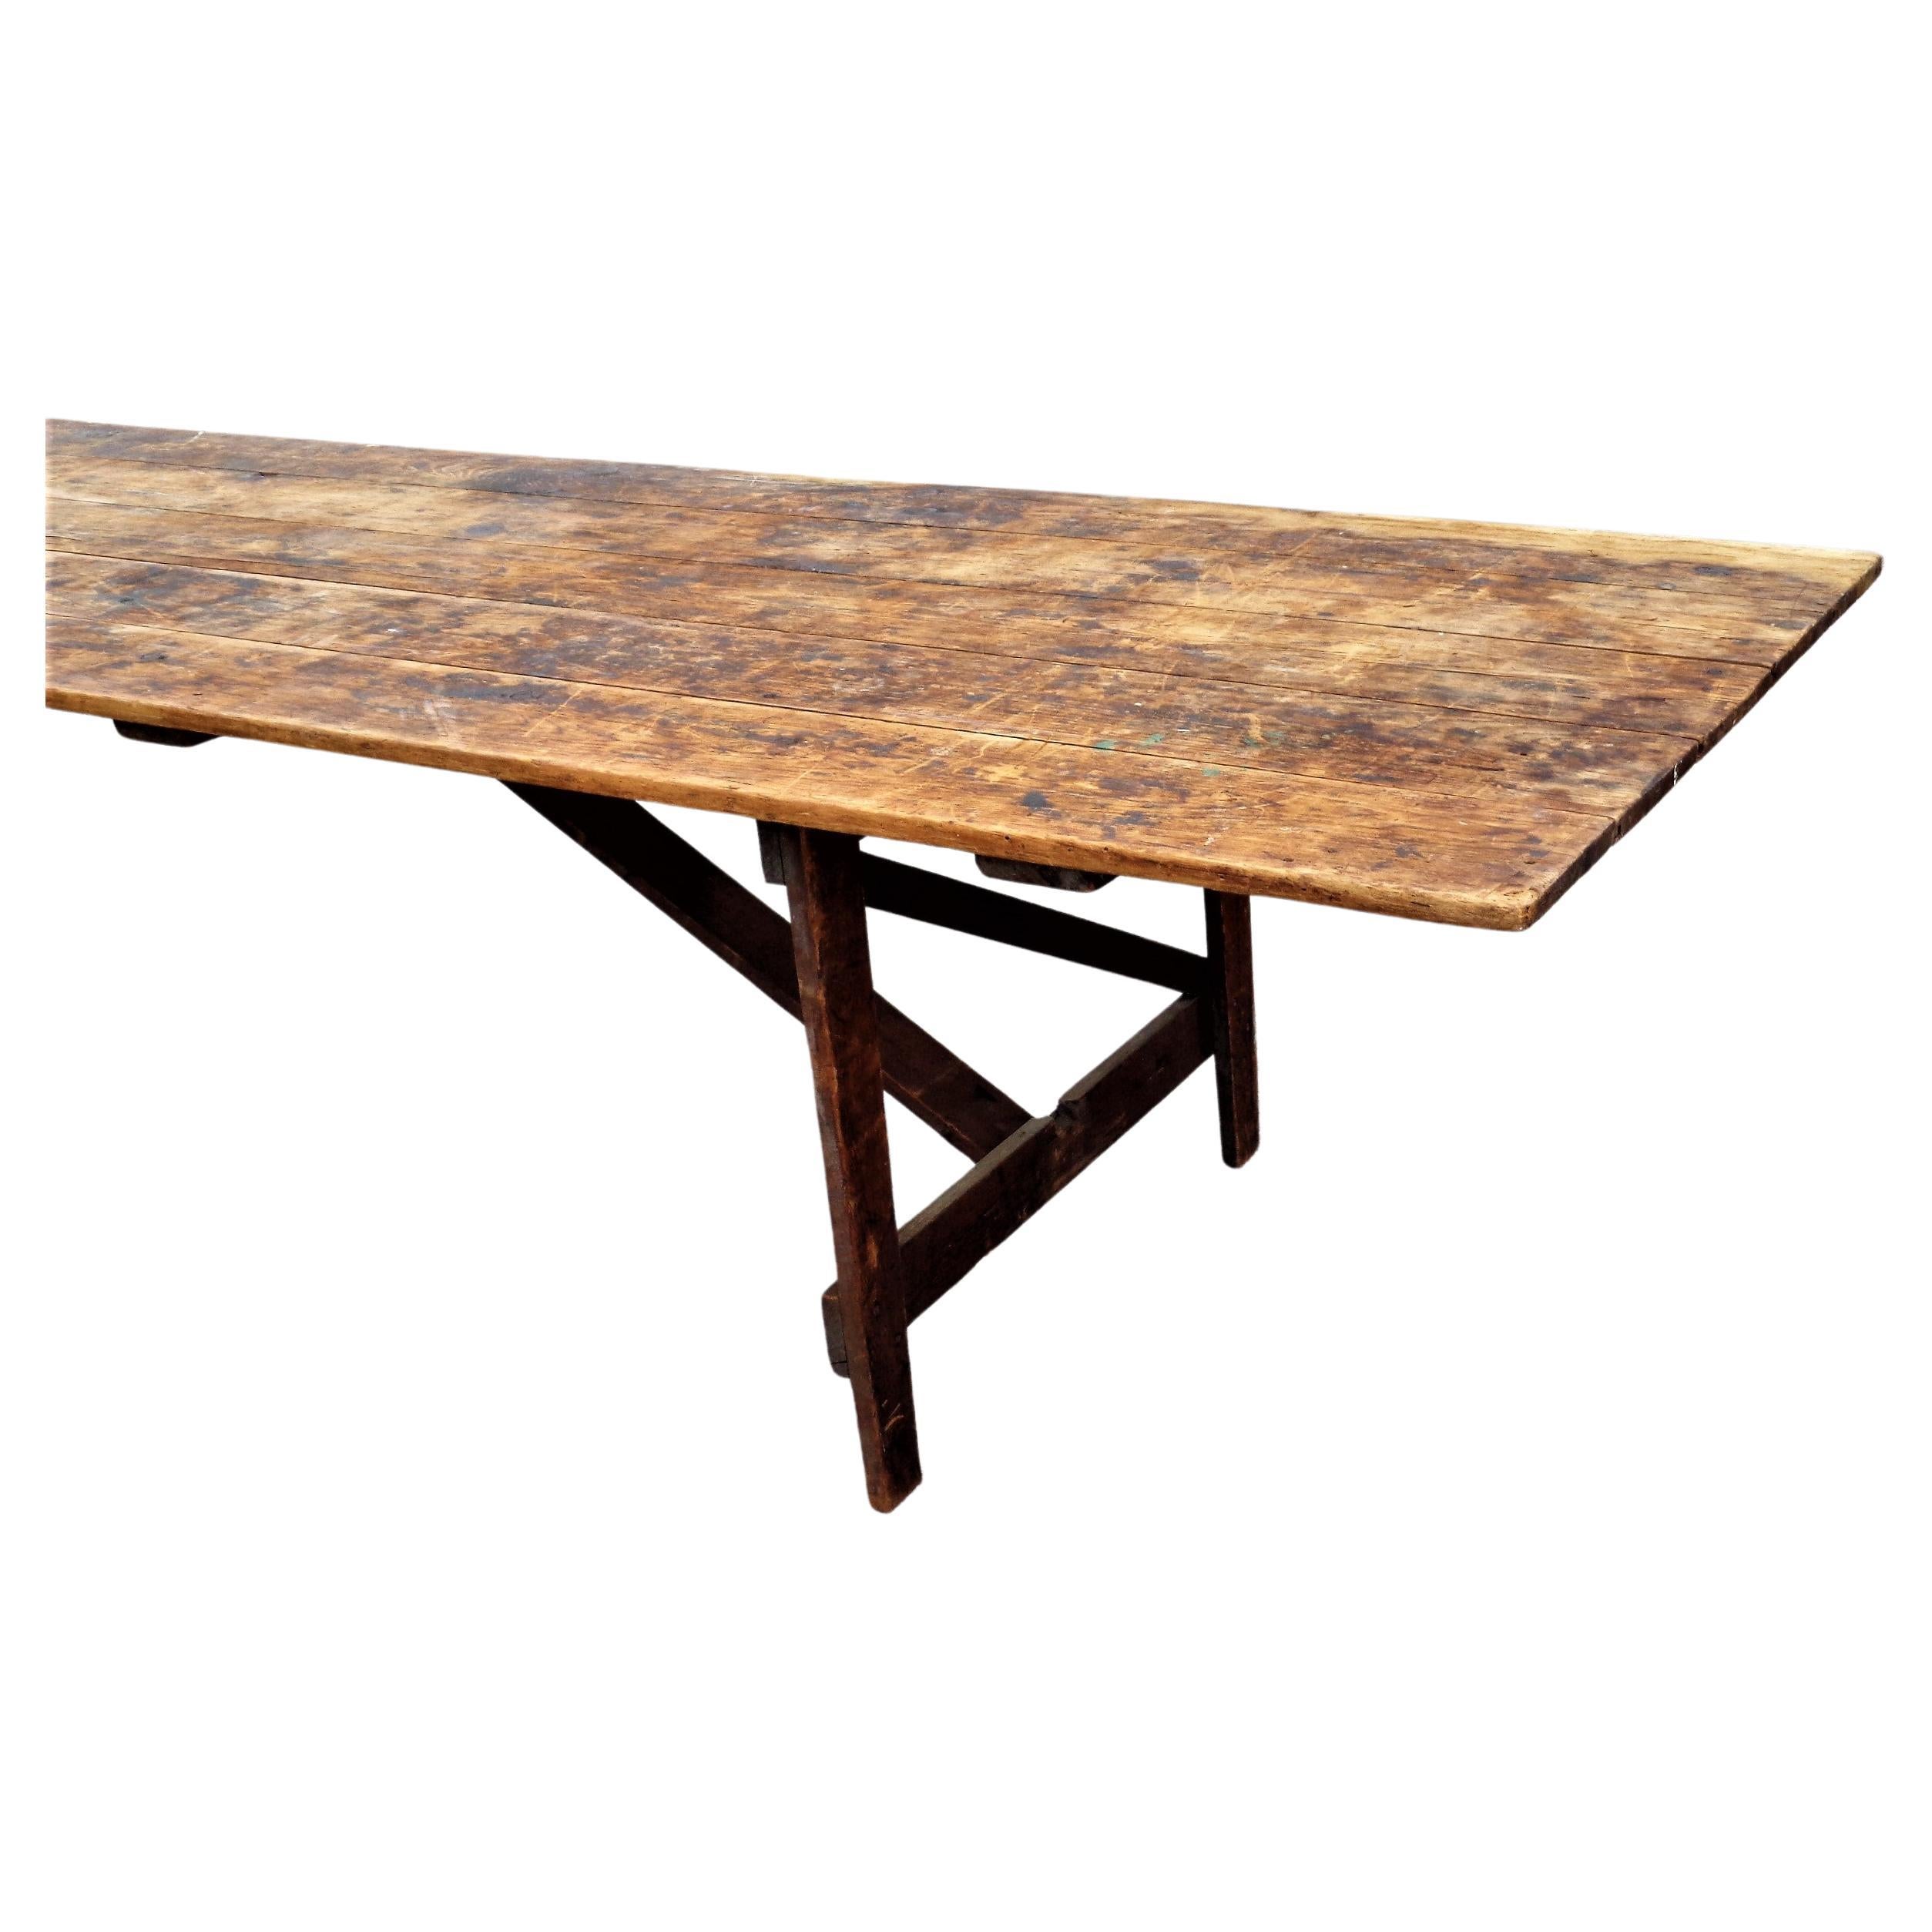 Country Antique American Eleven Foot Long Folding Farm Table For Sale